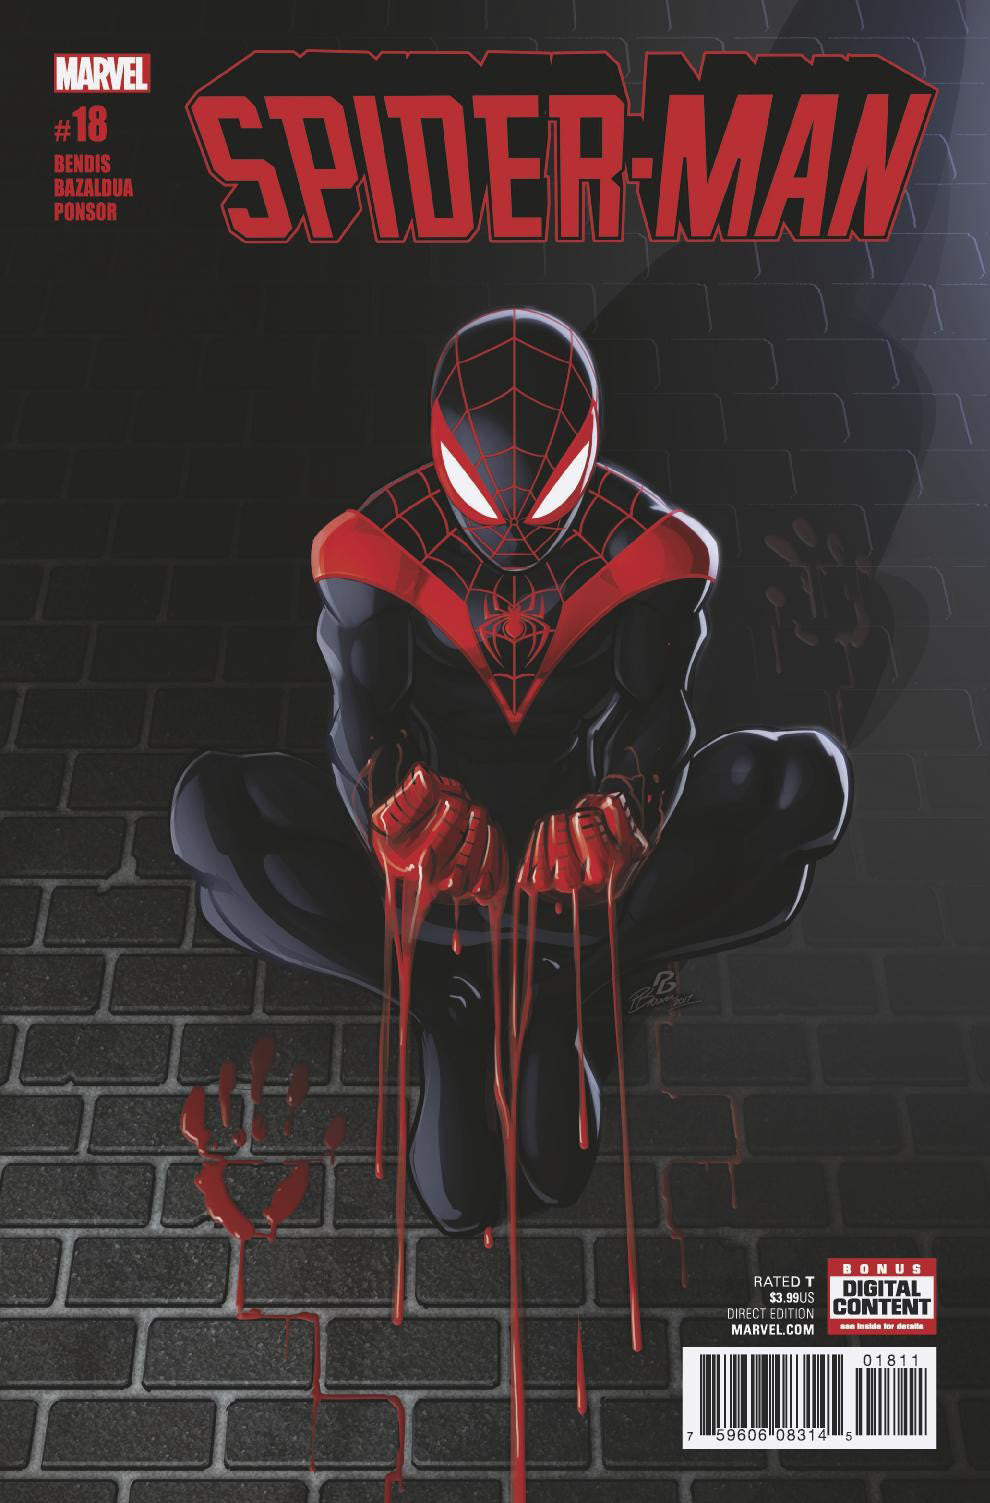 SPIDER-MAN #18 COVER